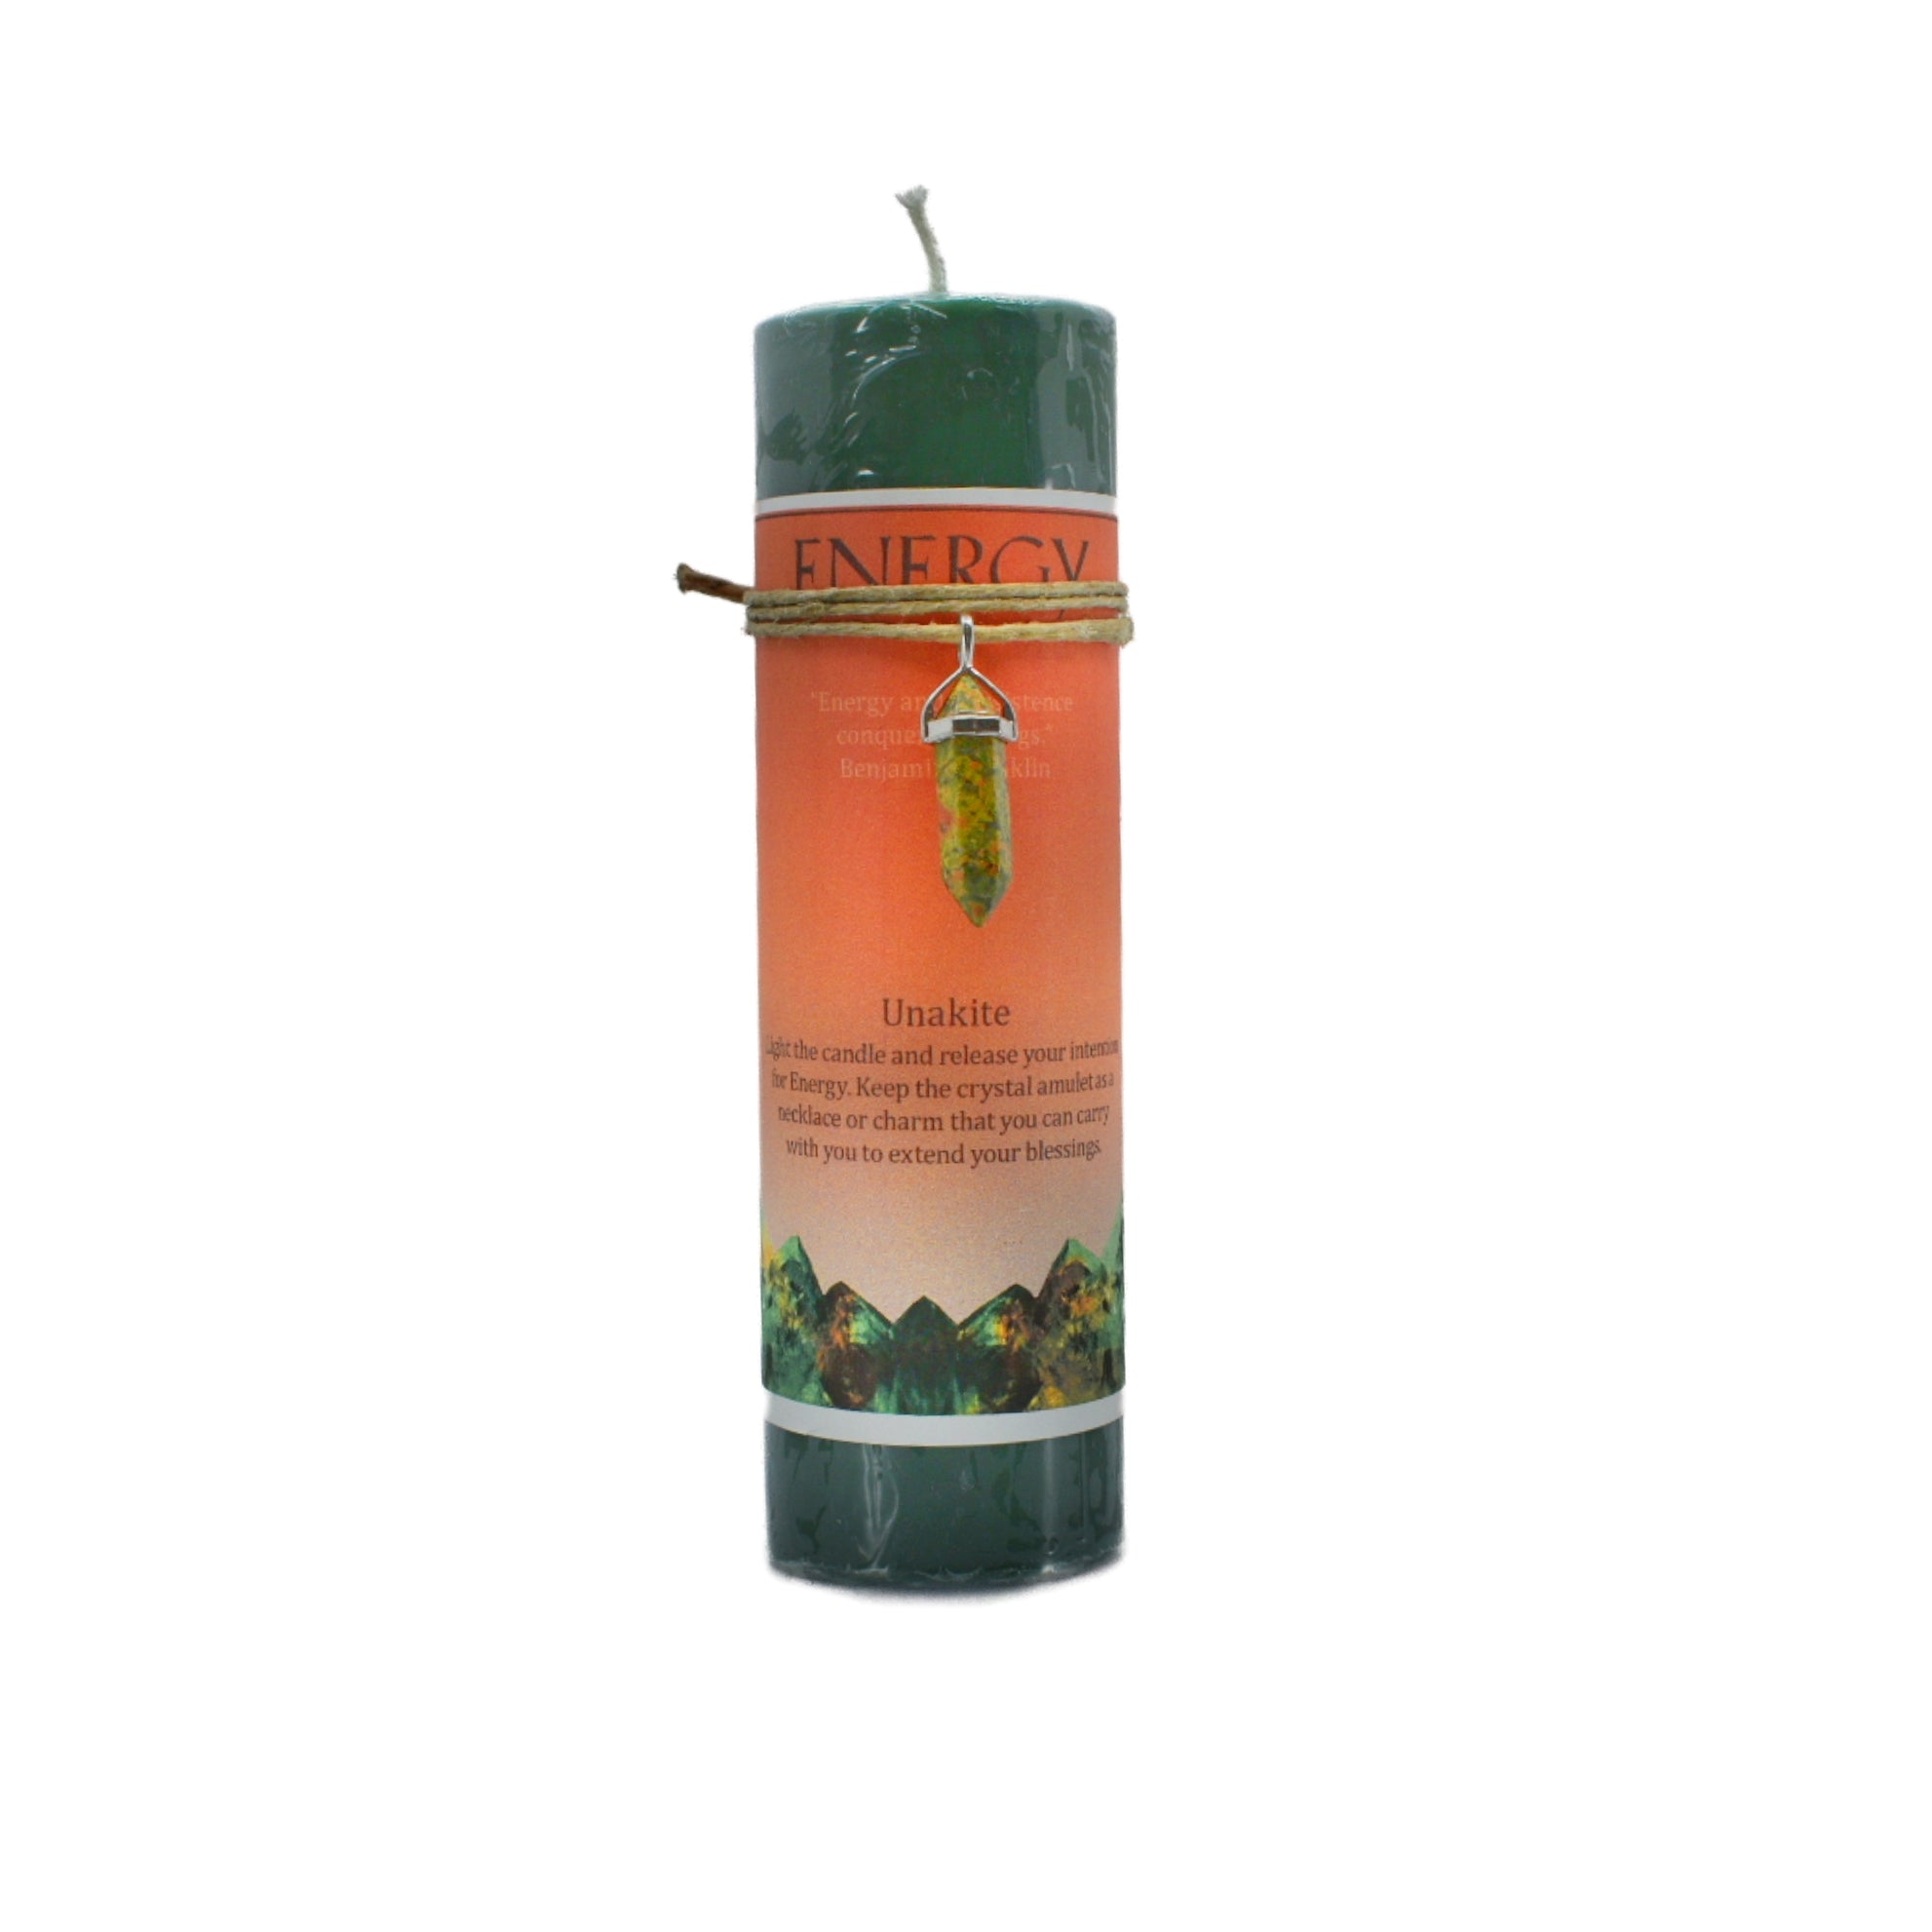 Energy Crystal Pendant Candle.  The candle is dark green and scented with garden herbs.  The double pointed crystal is Unakite.  Keep the crystal amulet as a necklace or charm.  Light this candle to release your intention for energy.